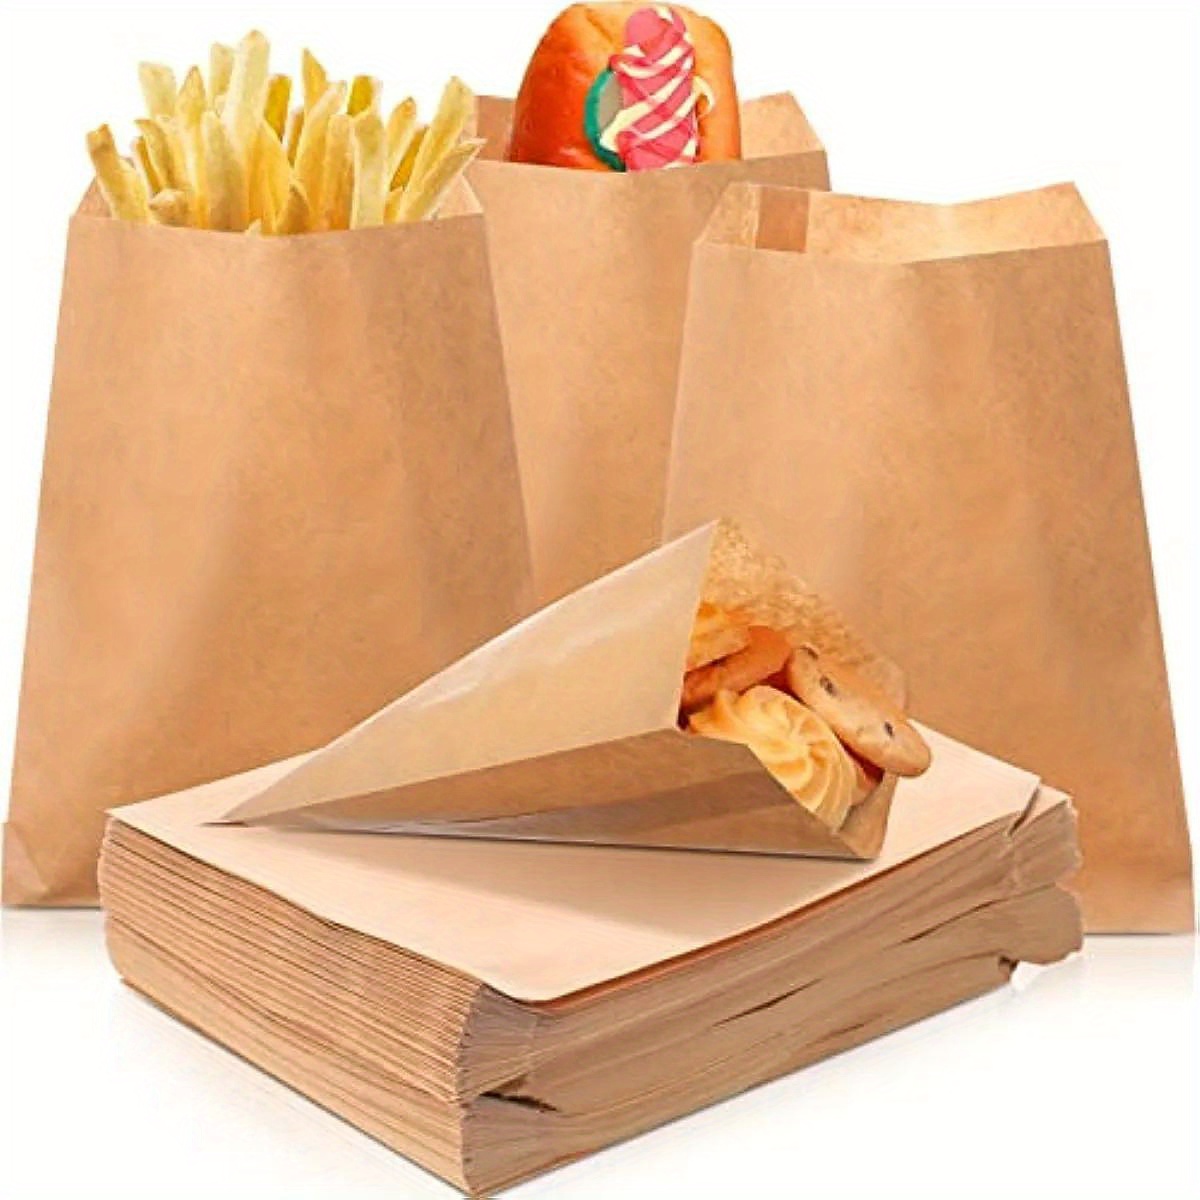 

25pcs, 13x18cm Brown Bags, 5x7 Inches, Made Of Grease-resistant Paper, These Flat, Greaseproof Bags Are Perfect For Snacks, Candy, Sandwiches, Popcorn, Doughnuts, And Pastries, Small Business Supplies